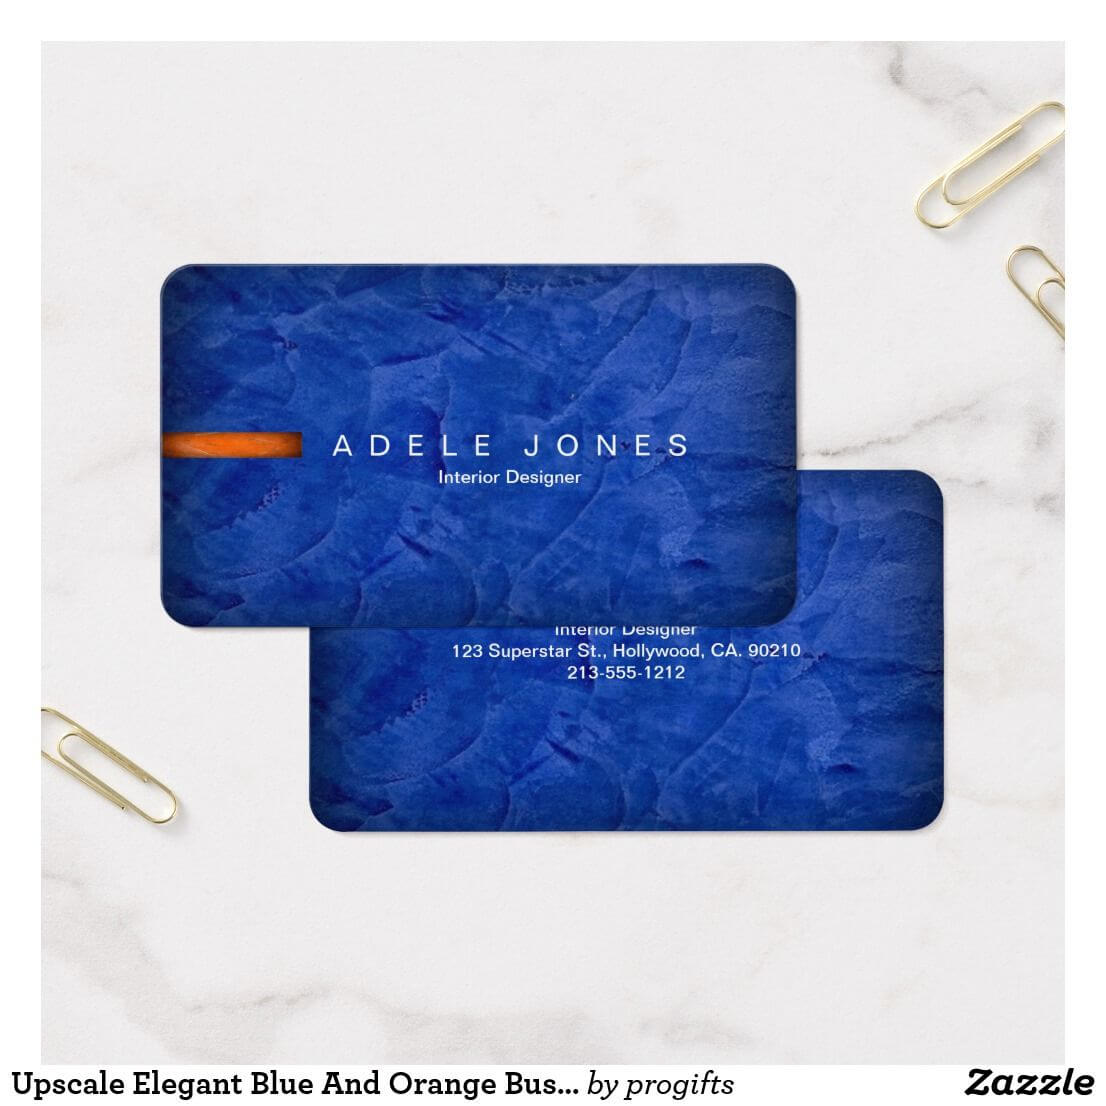 Upscale Elegant Blue And Orange Business Card | Zazzle With Plastering Business Cards Templates